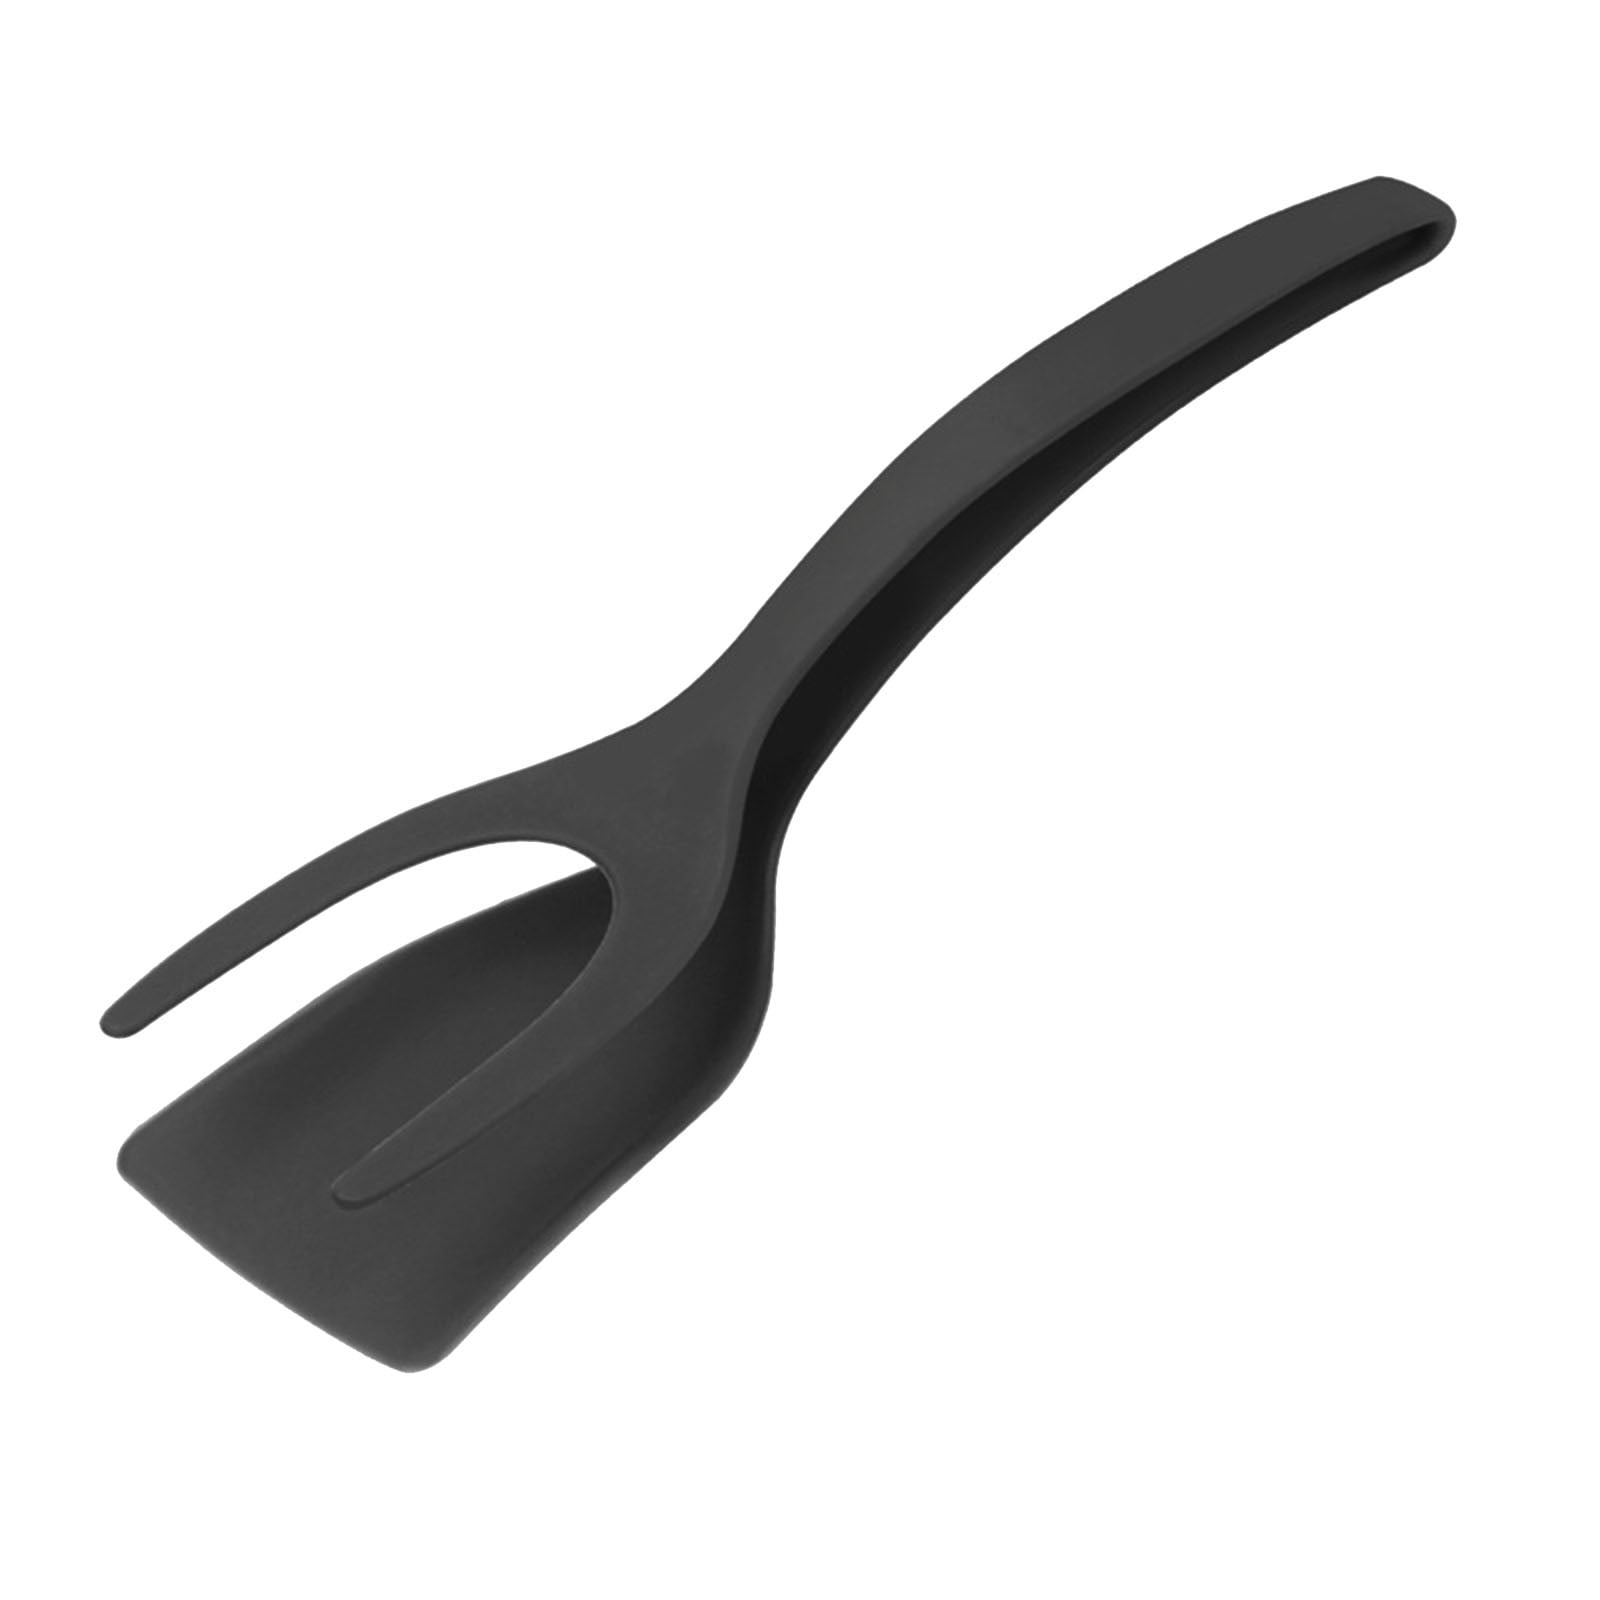 Tiitstoy Egg Flipper Spatula Silicone Egg Tong 2 in 1 Grip and